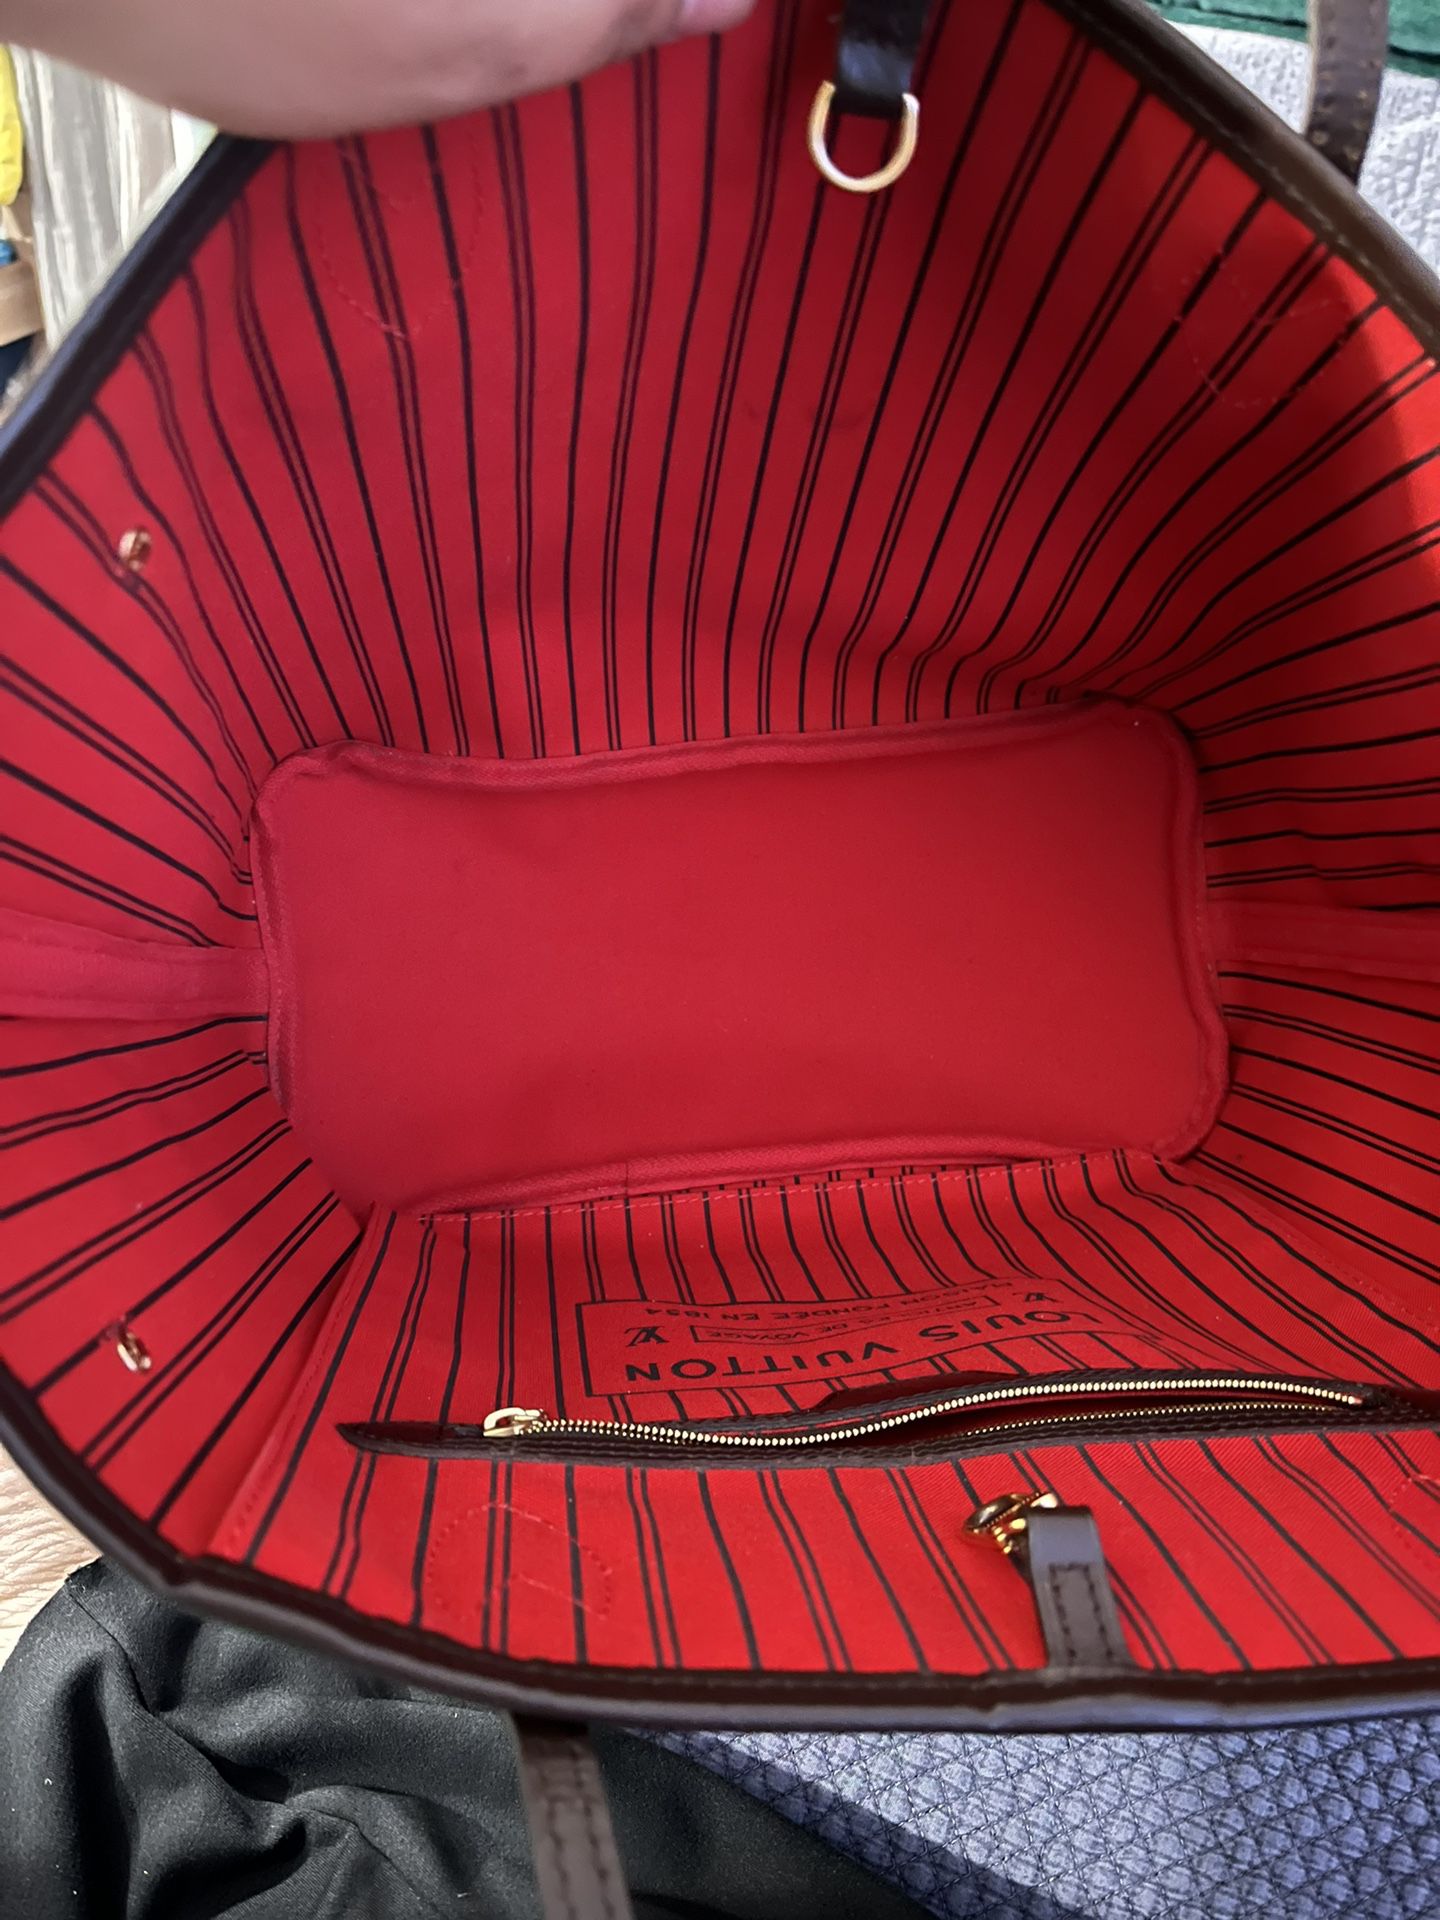 LOUIS VUITTON NEVERFULL for Sale in Bowie, MD - OfferUp